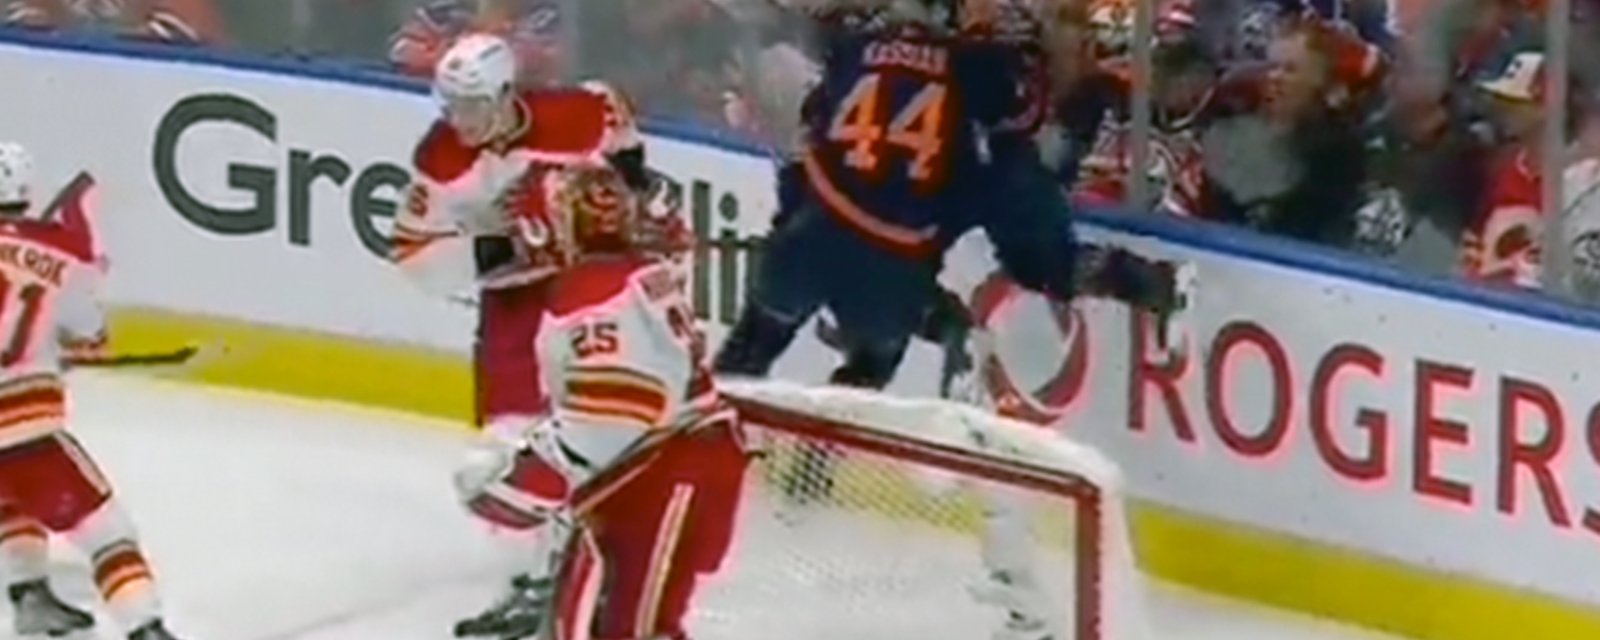 Oilers teammates Kassian and Archibald line each other up and absolutely smash each other behind Flames net